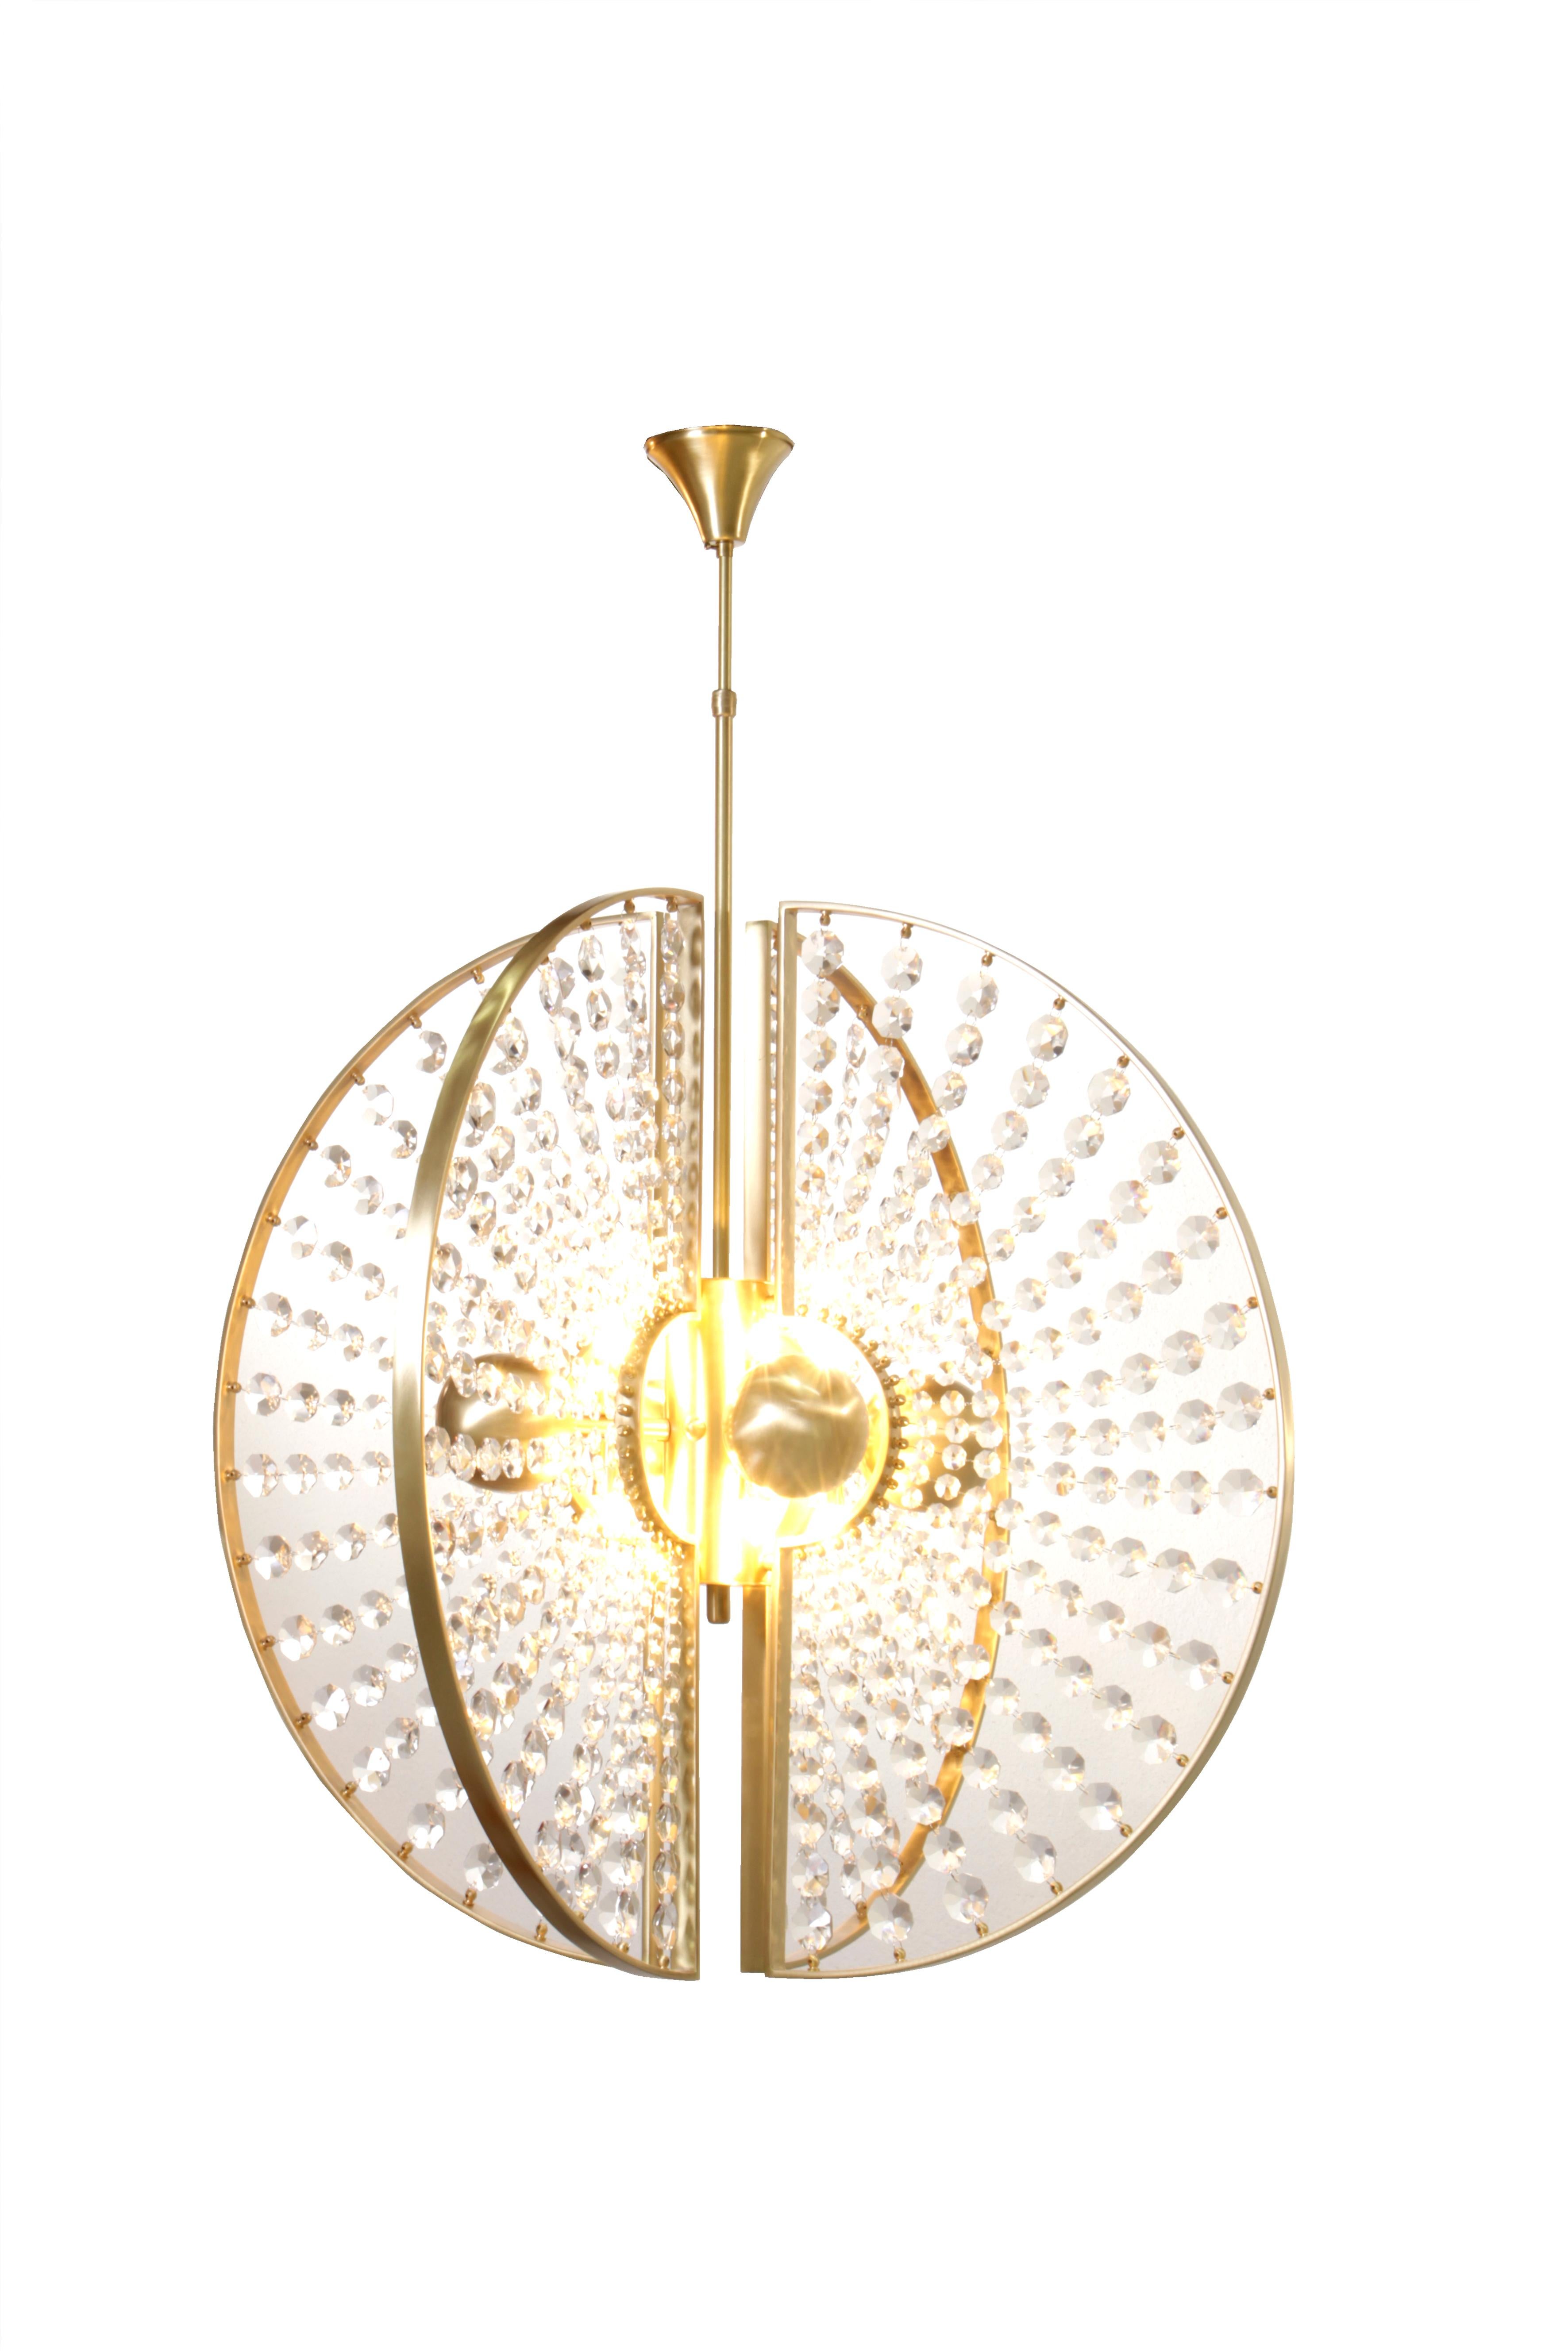 The Roxy chandelier is just as thrilling and desirable as her name implies. Four decadent metal orbs are surrounded by glittering crystal sunburst panels surrounded by a metal halo. Look too closely and this luxury chandelier will steal your